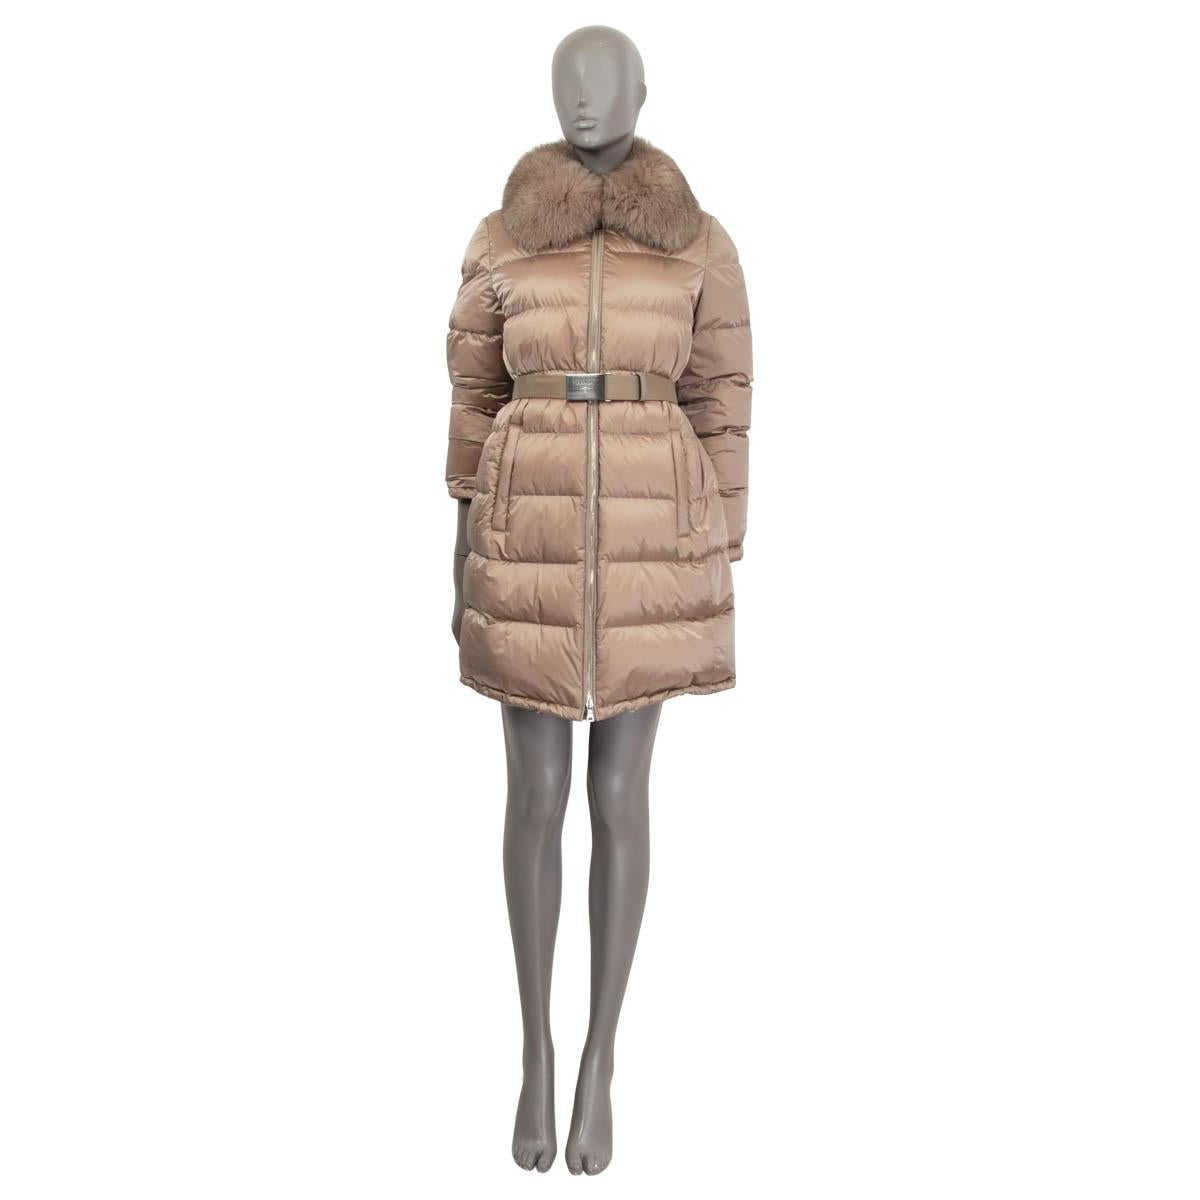 100% authentic Prada belted coat in light gray nylon (100%). Features two zip pockets on the front. Has a fur collar and buttoned cuffs. Opens with a silver metal zipper on the front and a button on the front. Unlined. Coated with down and